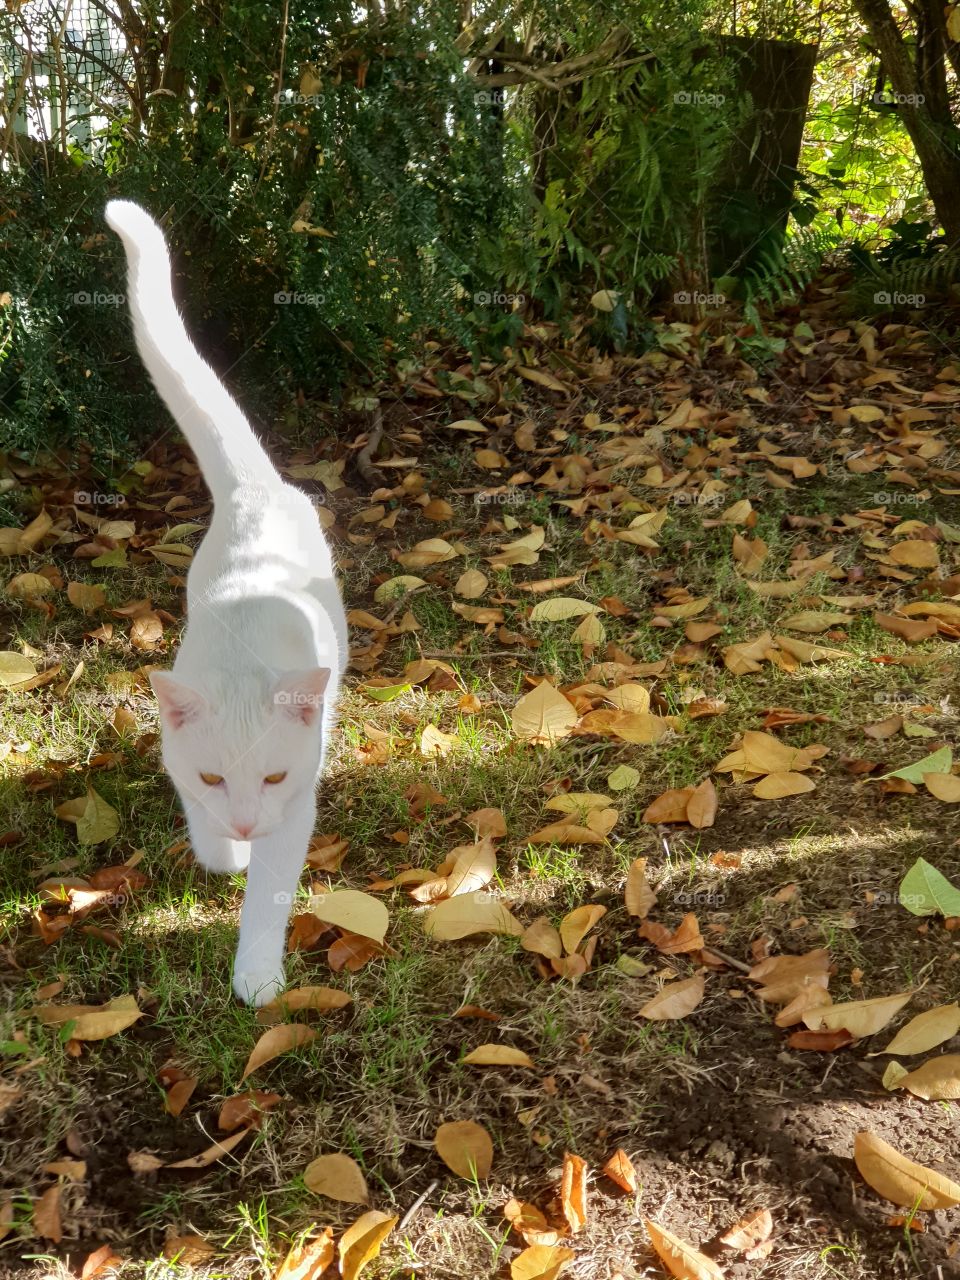 my cat ghost in the autumn leaves